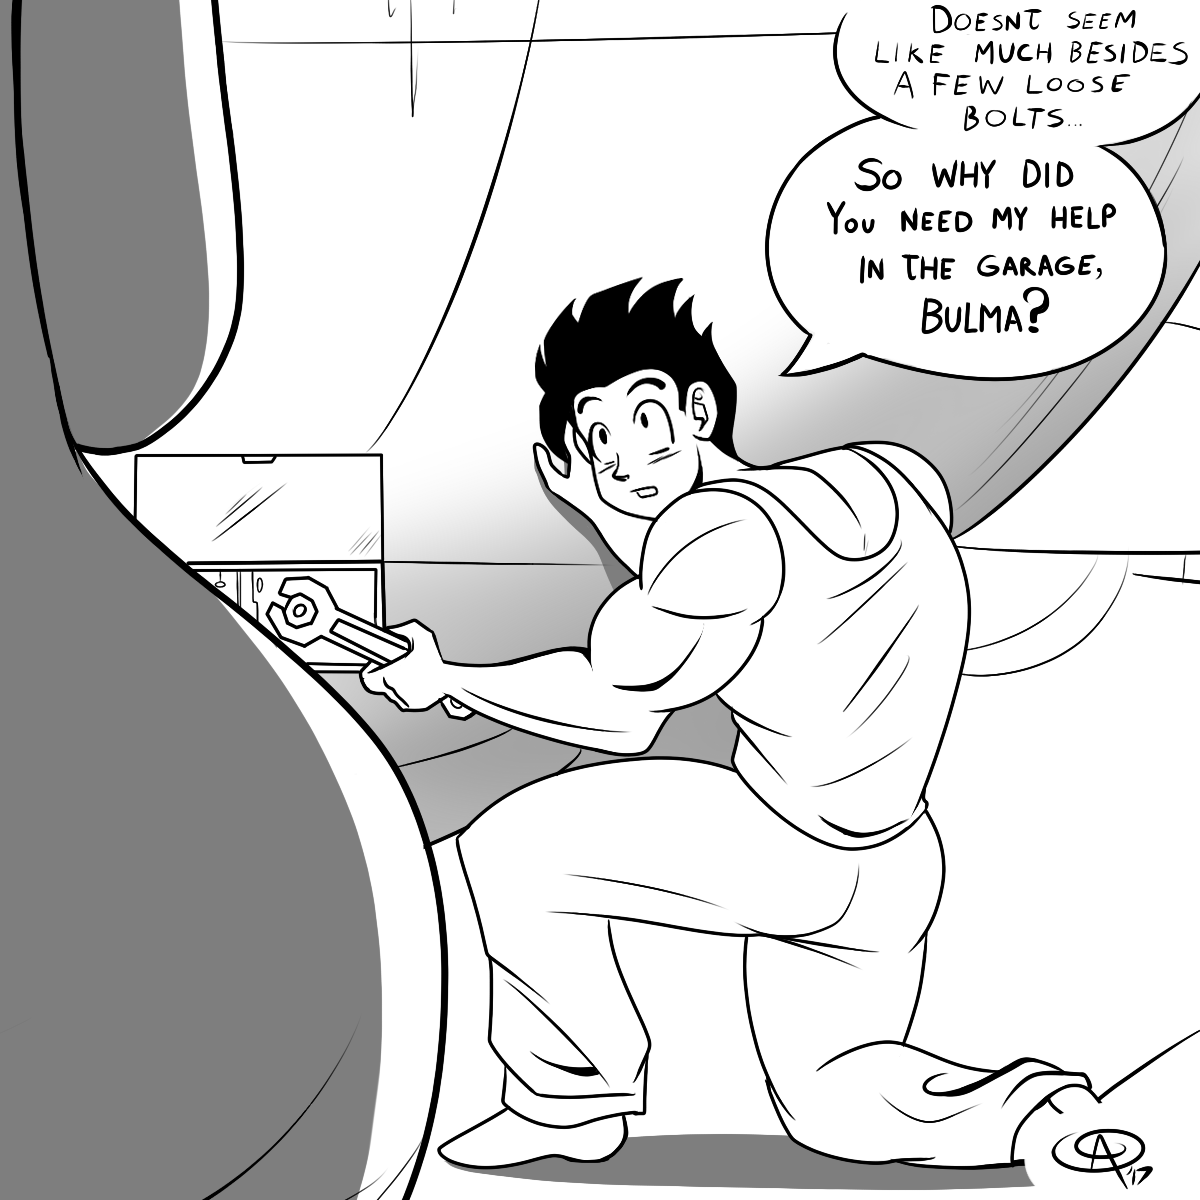 chillguydraws: Revisited and old Dragon Ball Z doodle comic I did with a tad more